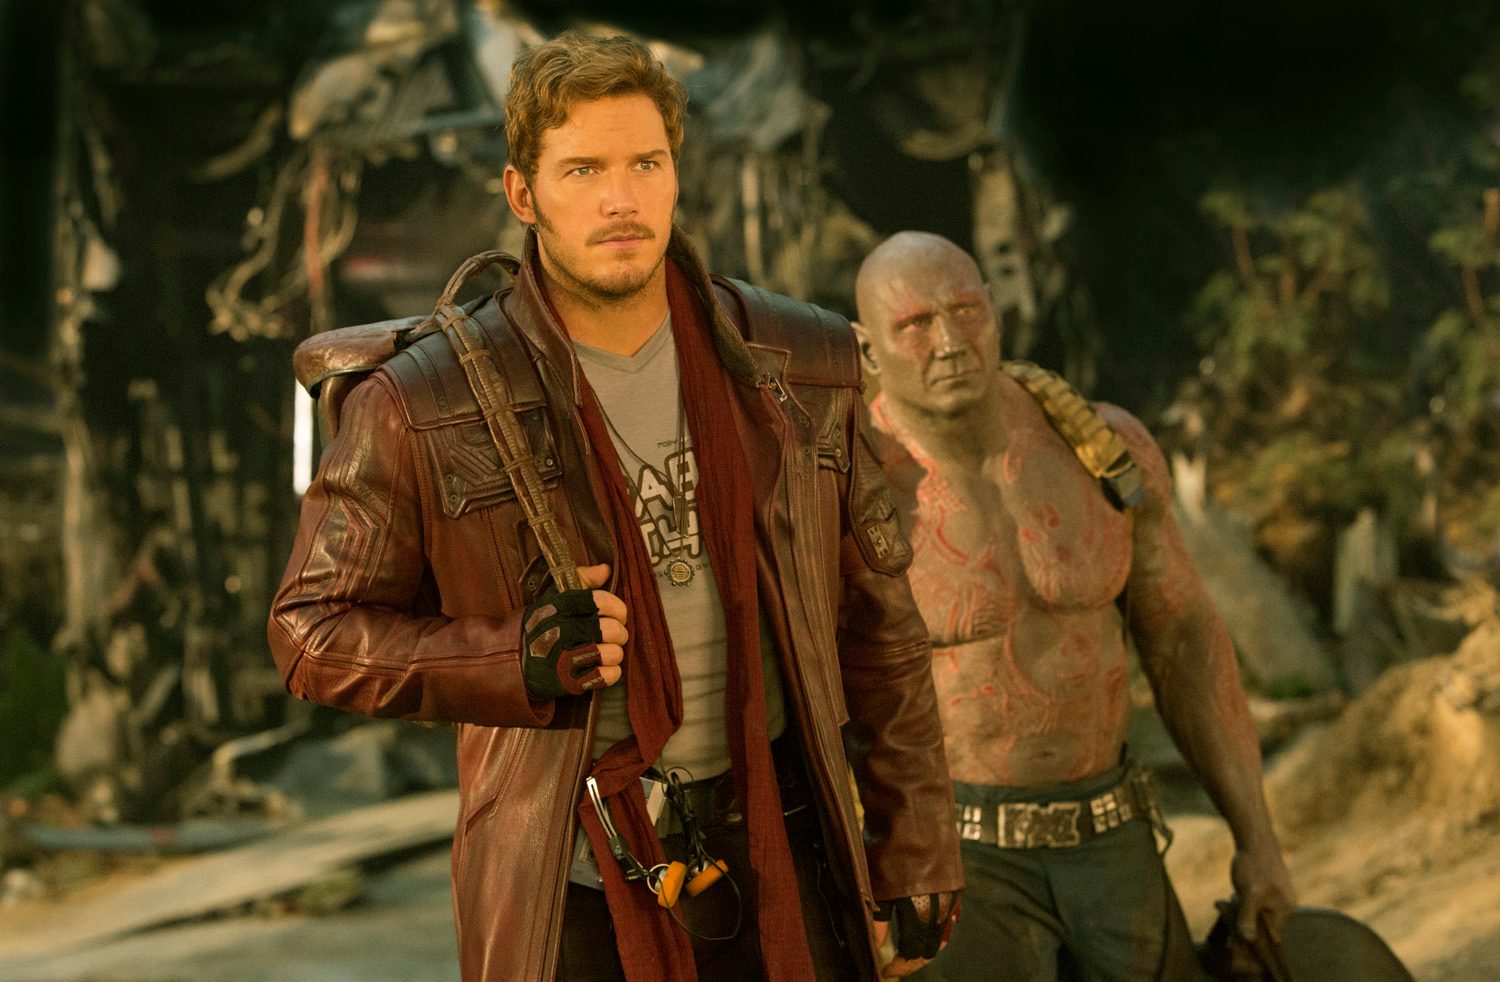 STAR LORD AND DRAX. Chris Pratt and Dave Bautista star in Marvel's 'Guardians Of The Galaxy Vol. 2.' Photo courtesy of Walt Disney Studios Motion Pictures 